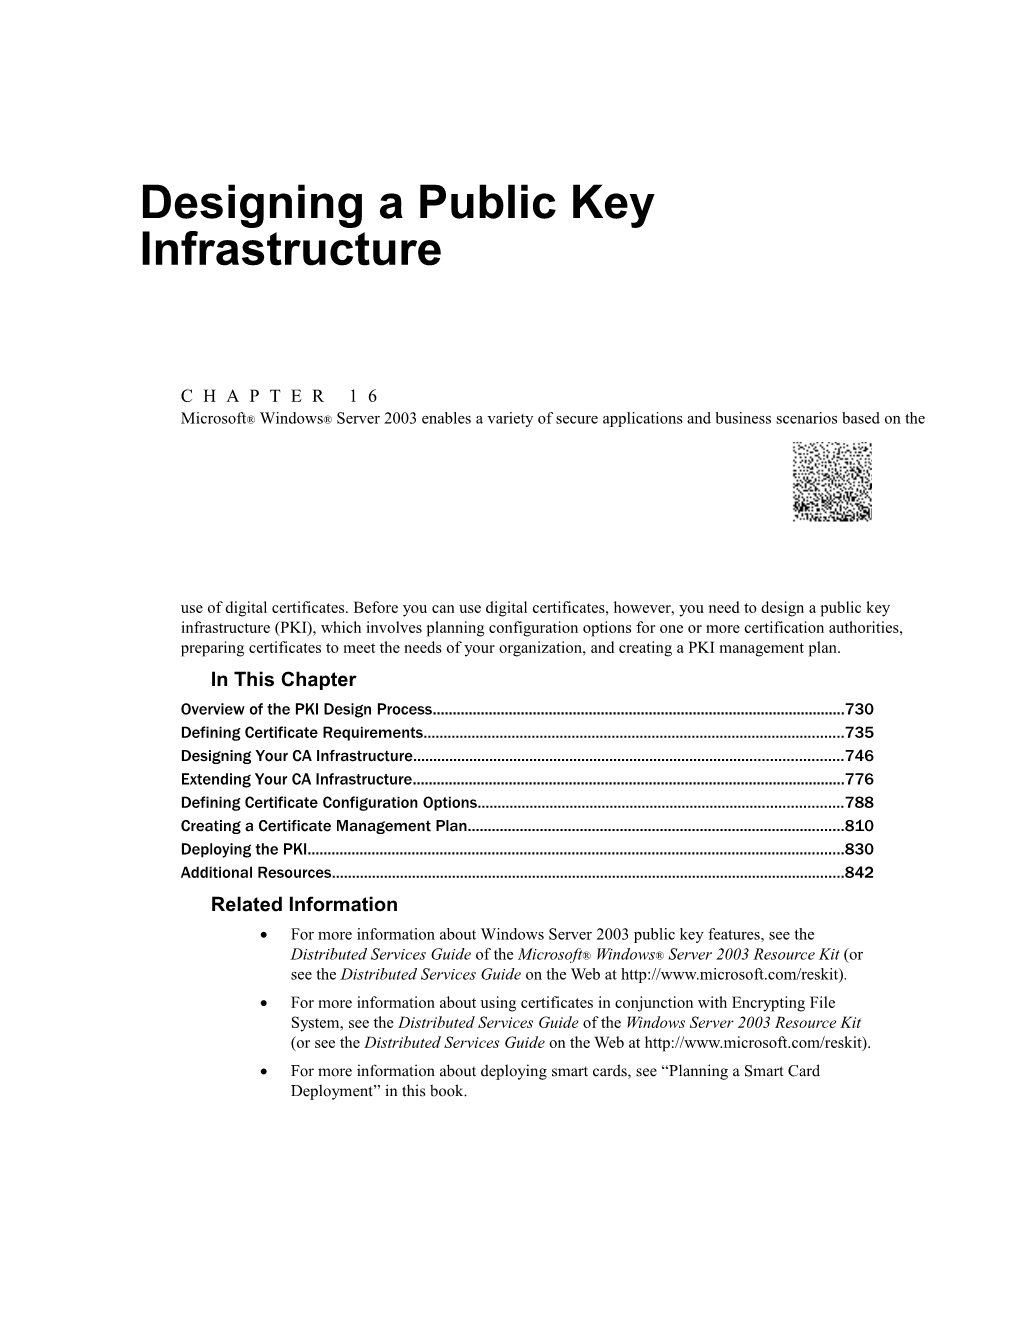 20 CHAPTER 16 Designing a Public Key Infrastructure